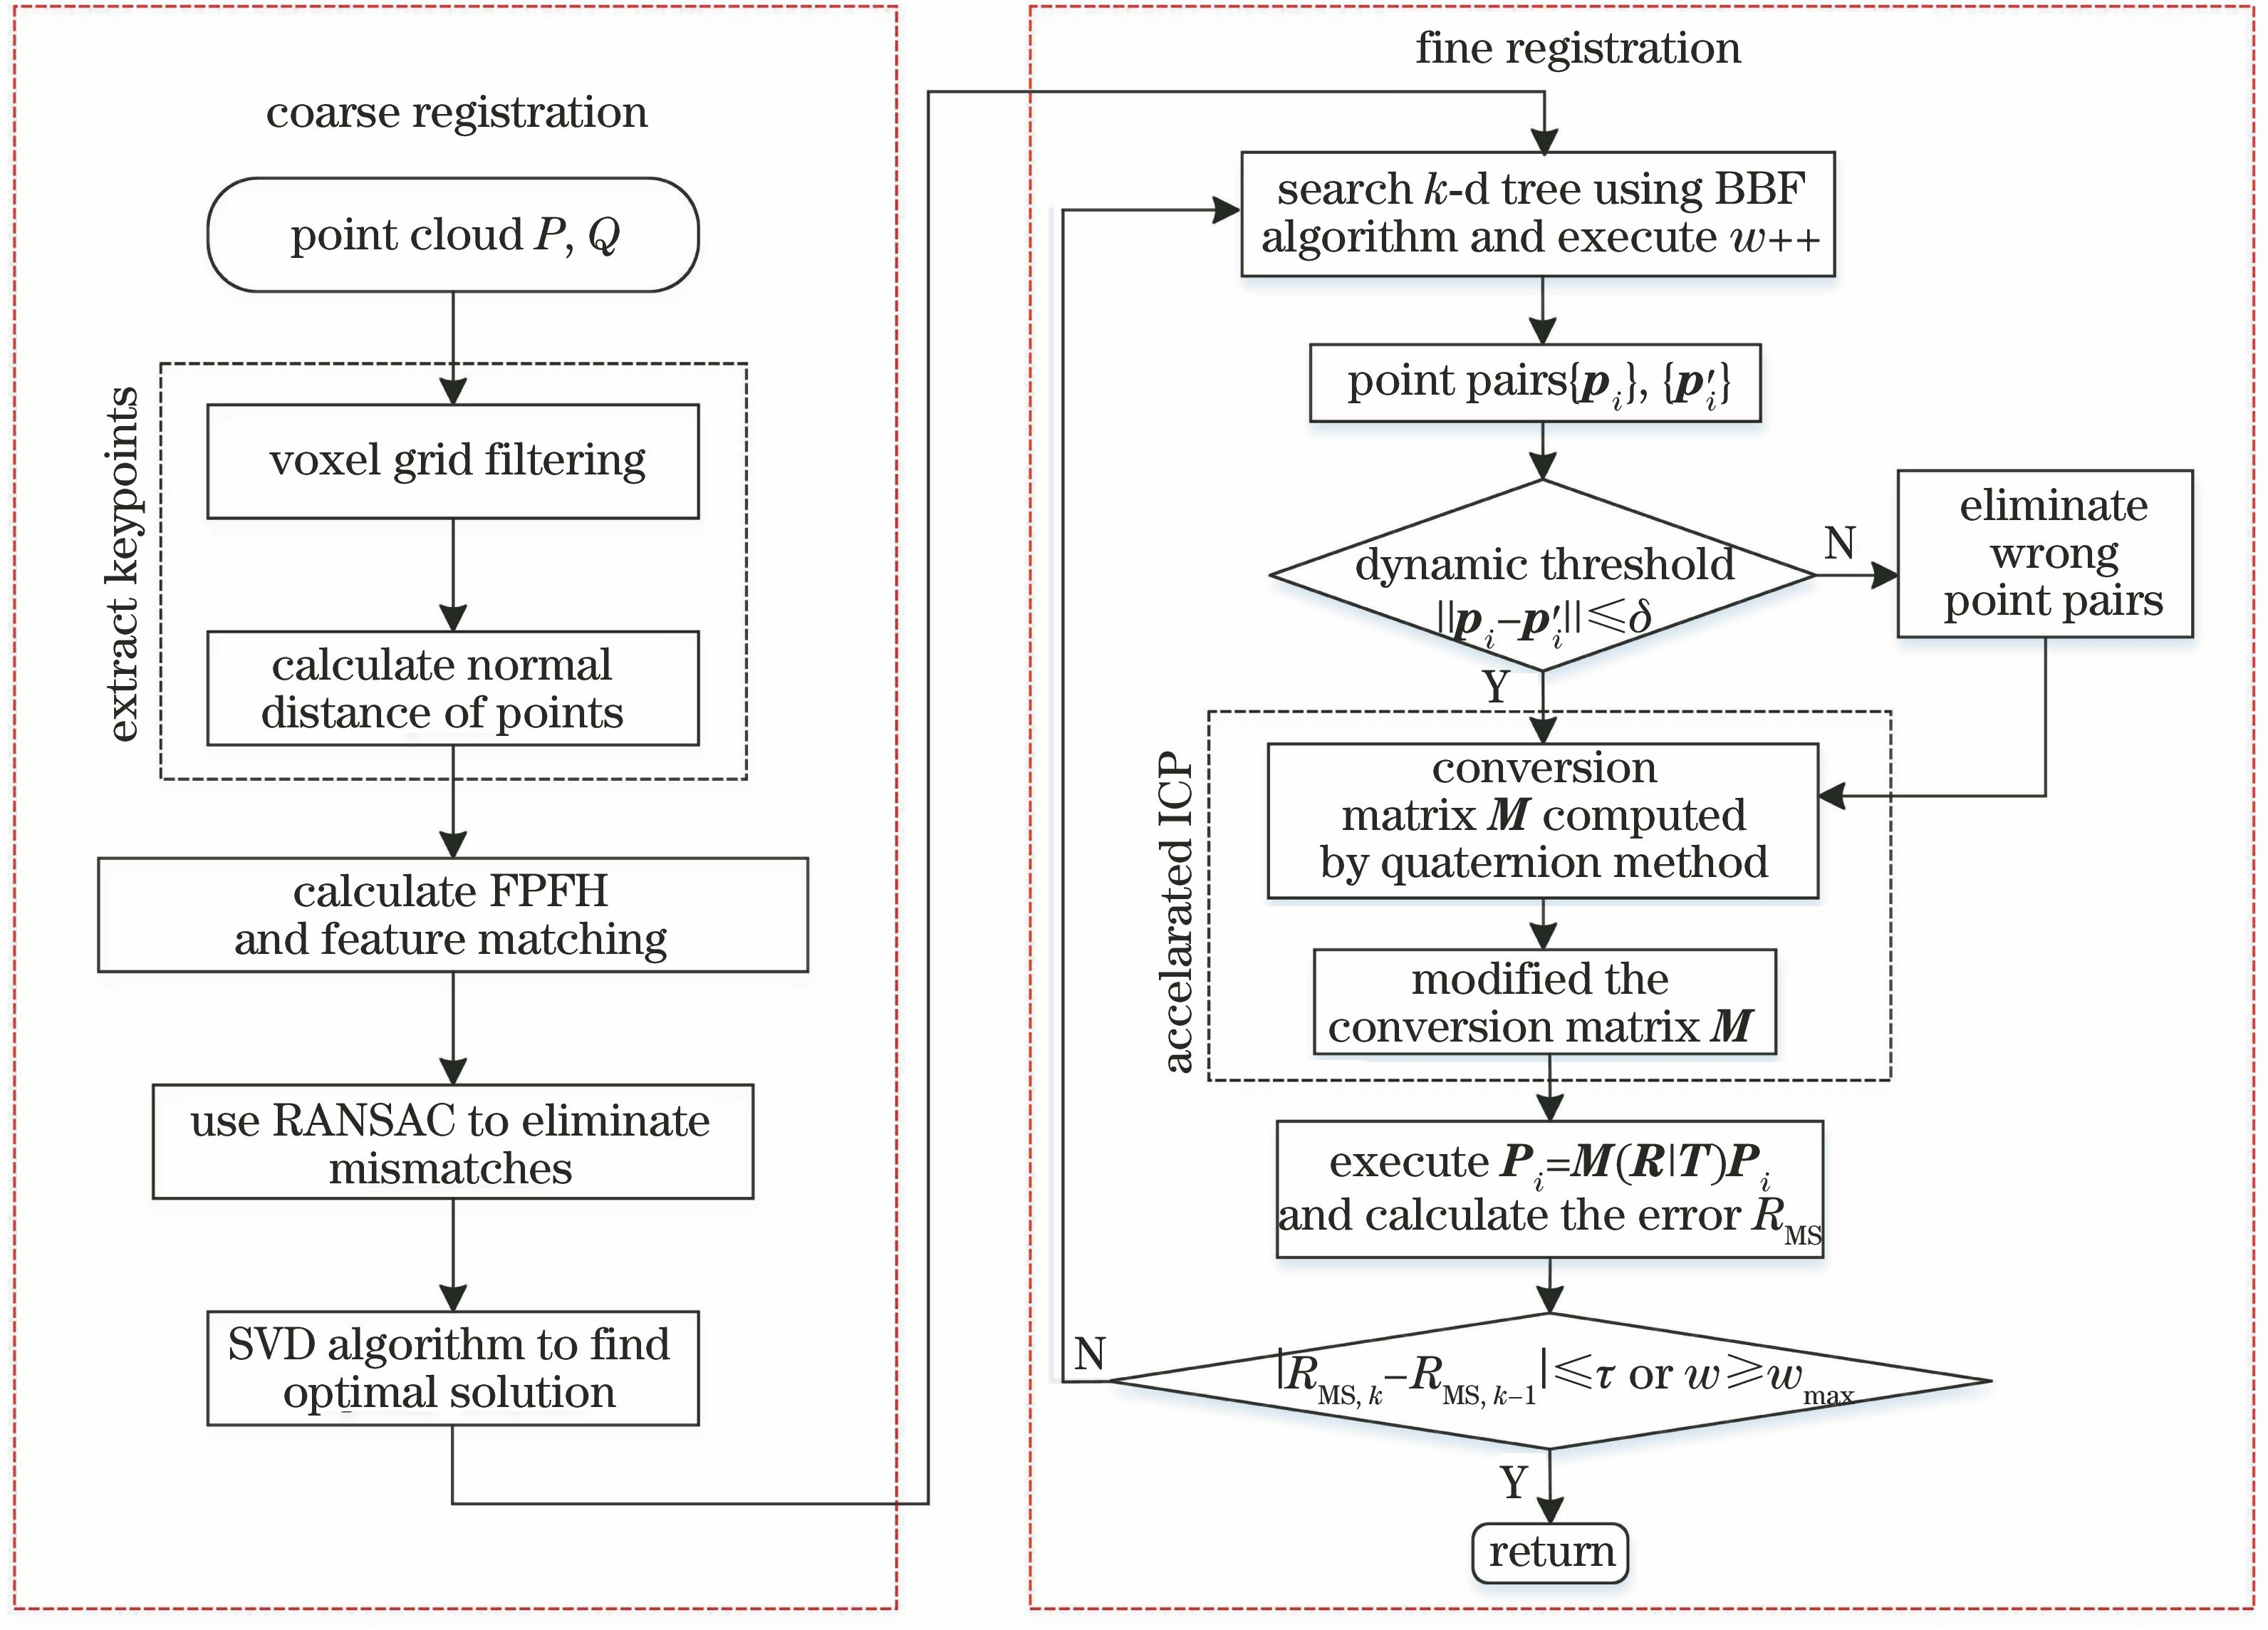 Flowchart of registration of point clouds P and Q